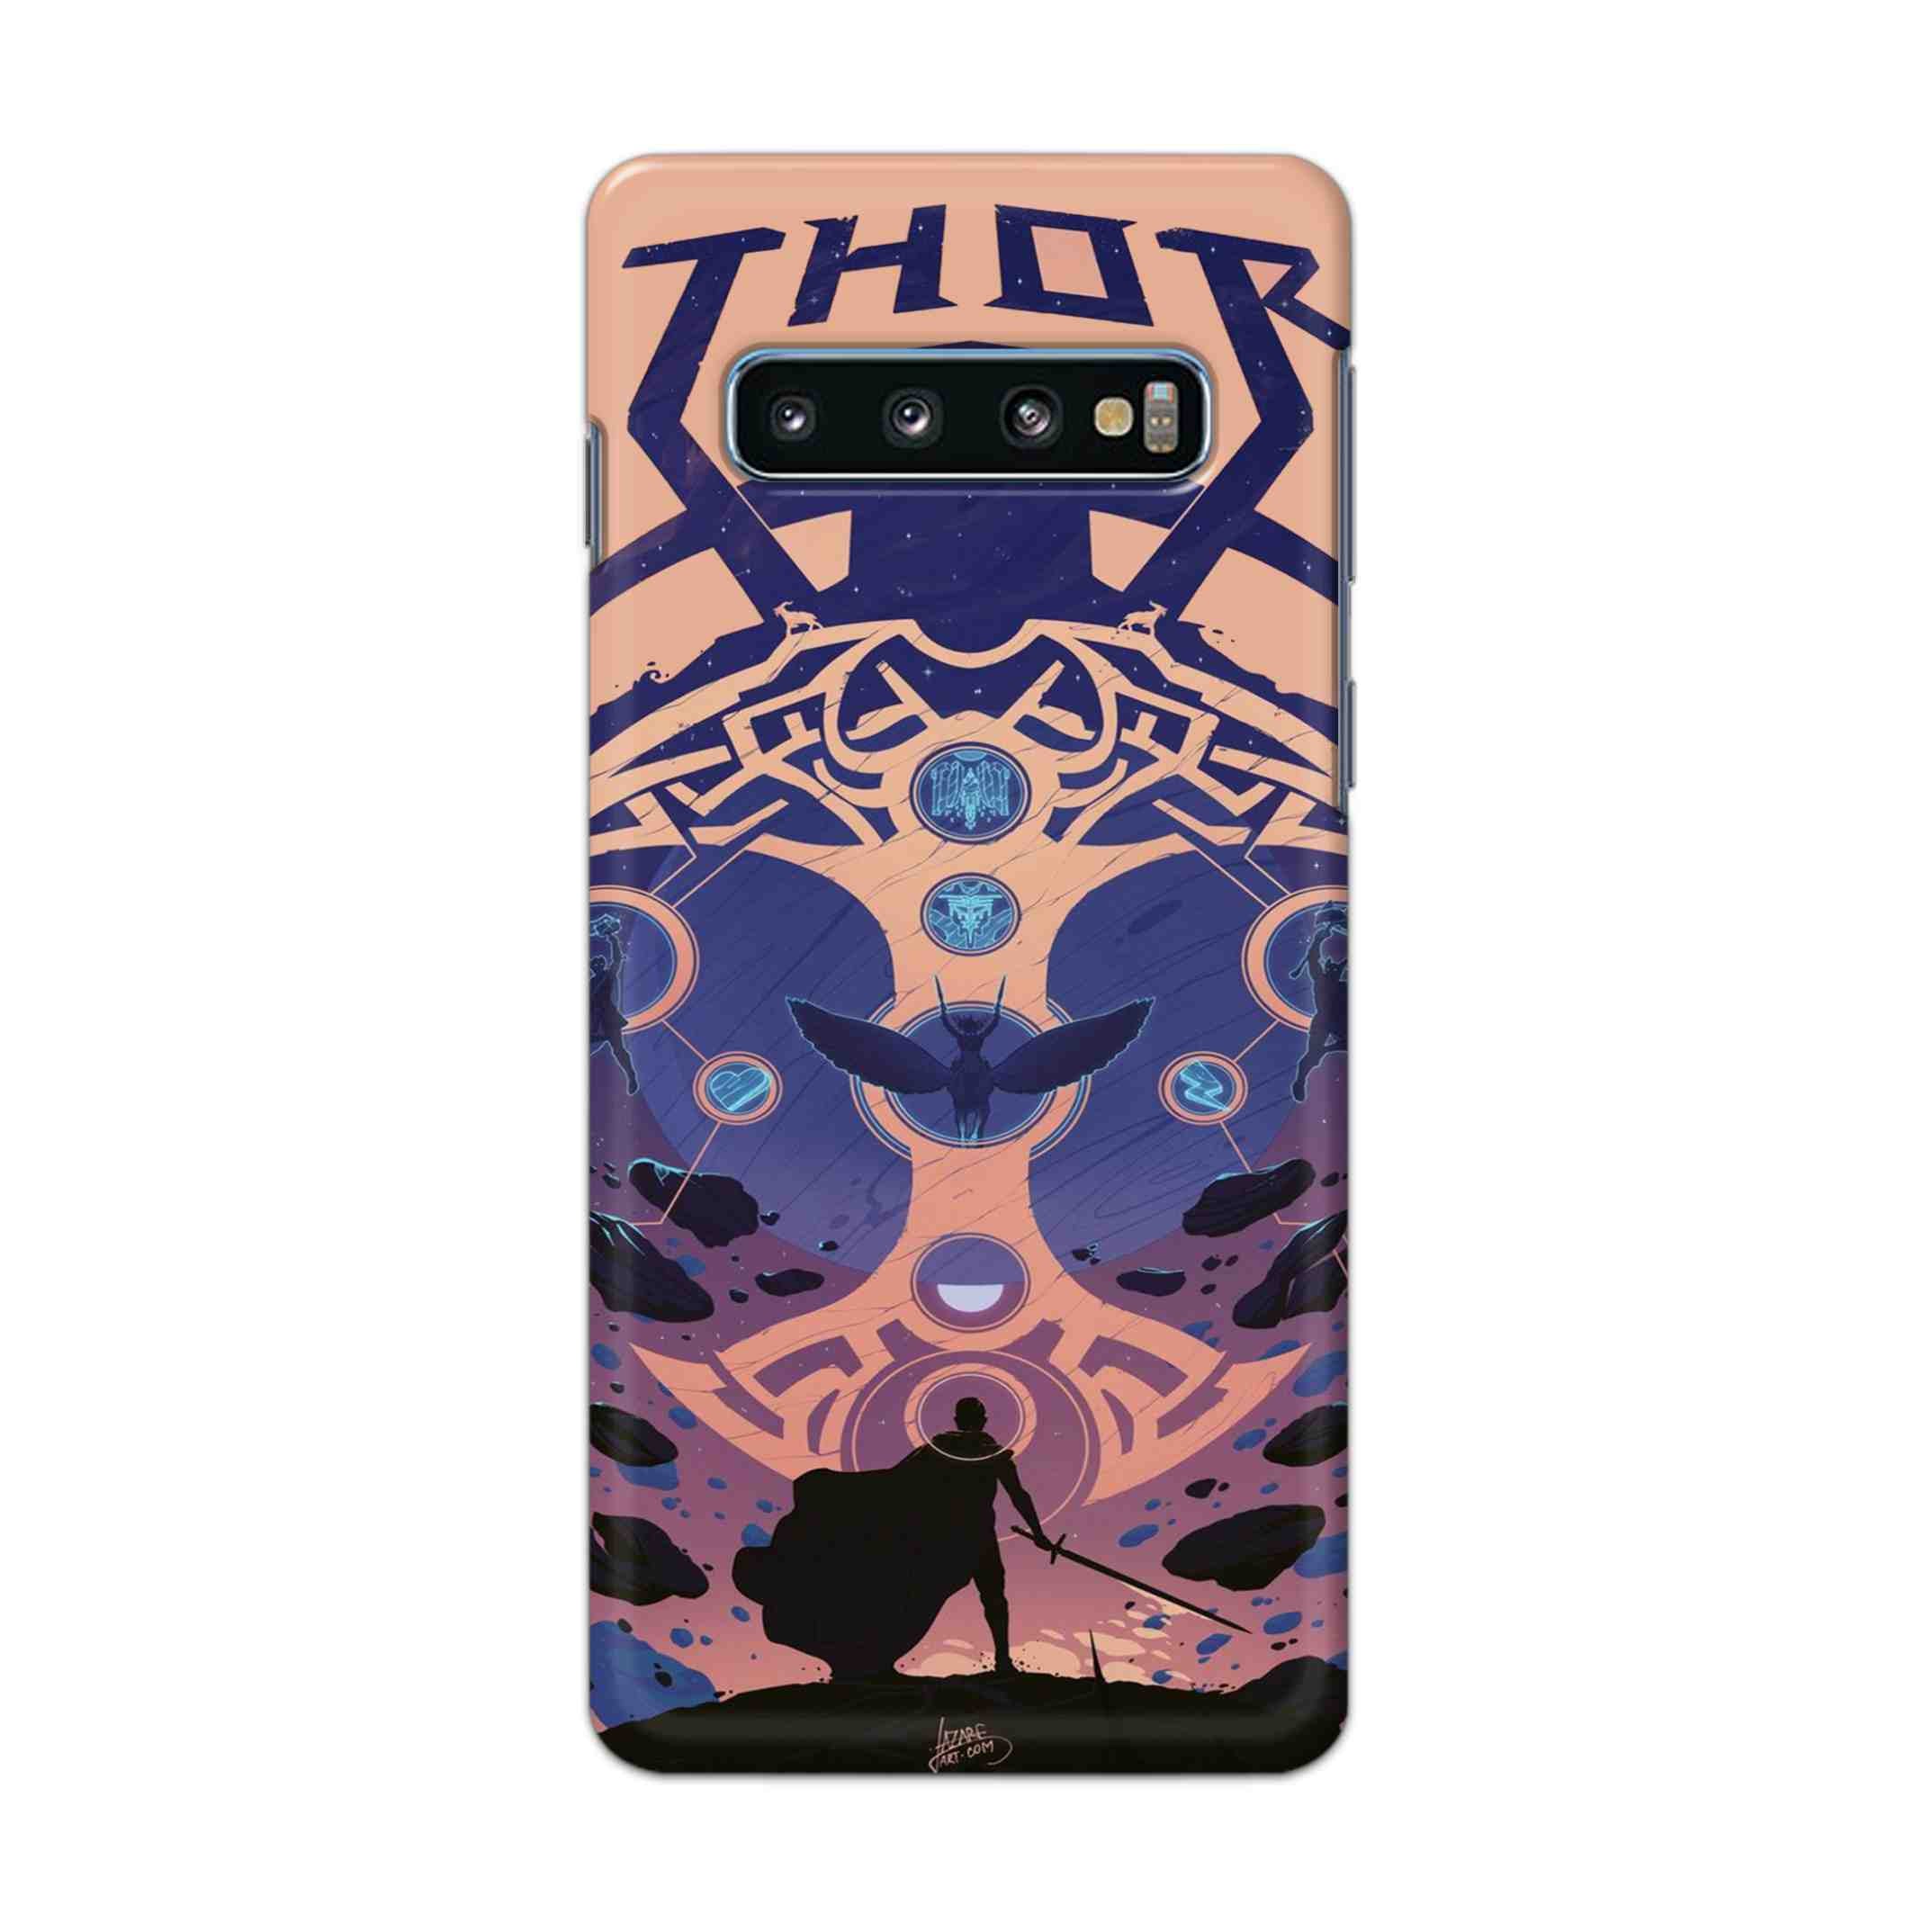 Buy Thor Hard Back Mobile Phone Case Cover For Samsung Galaxy S10 Plus Online